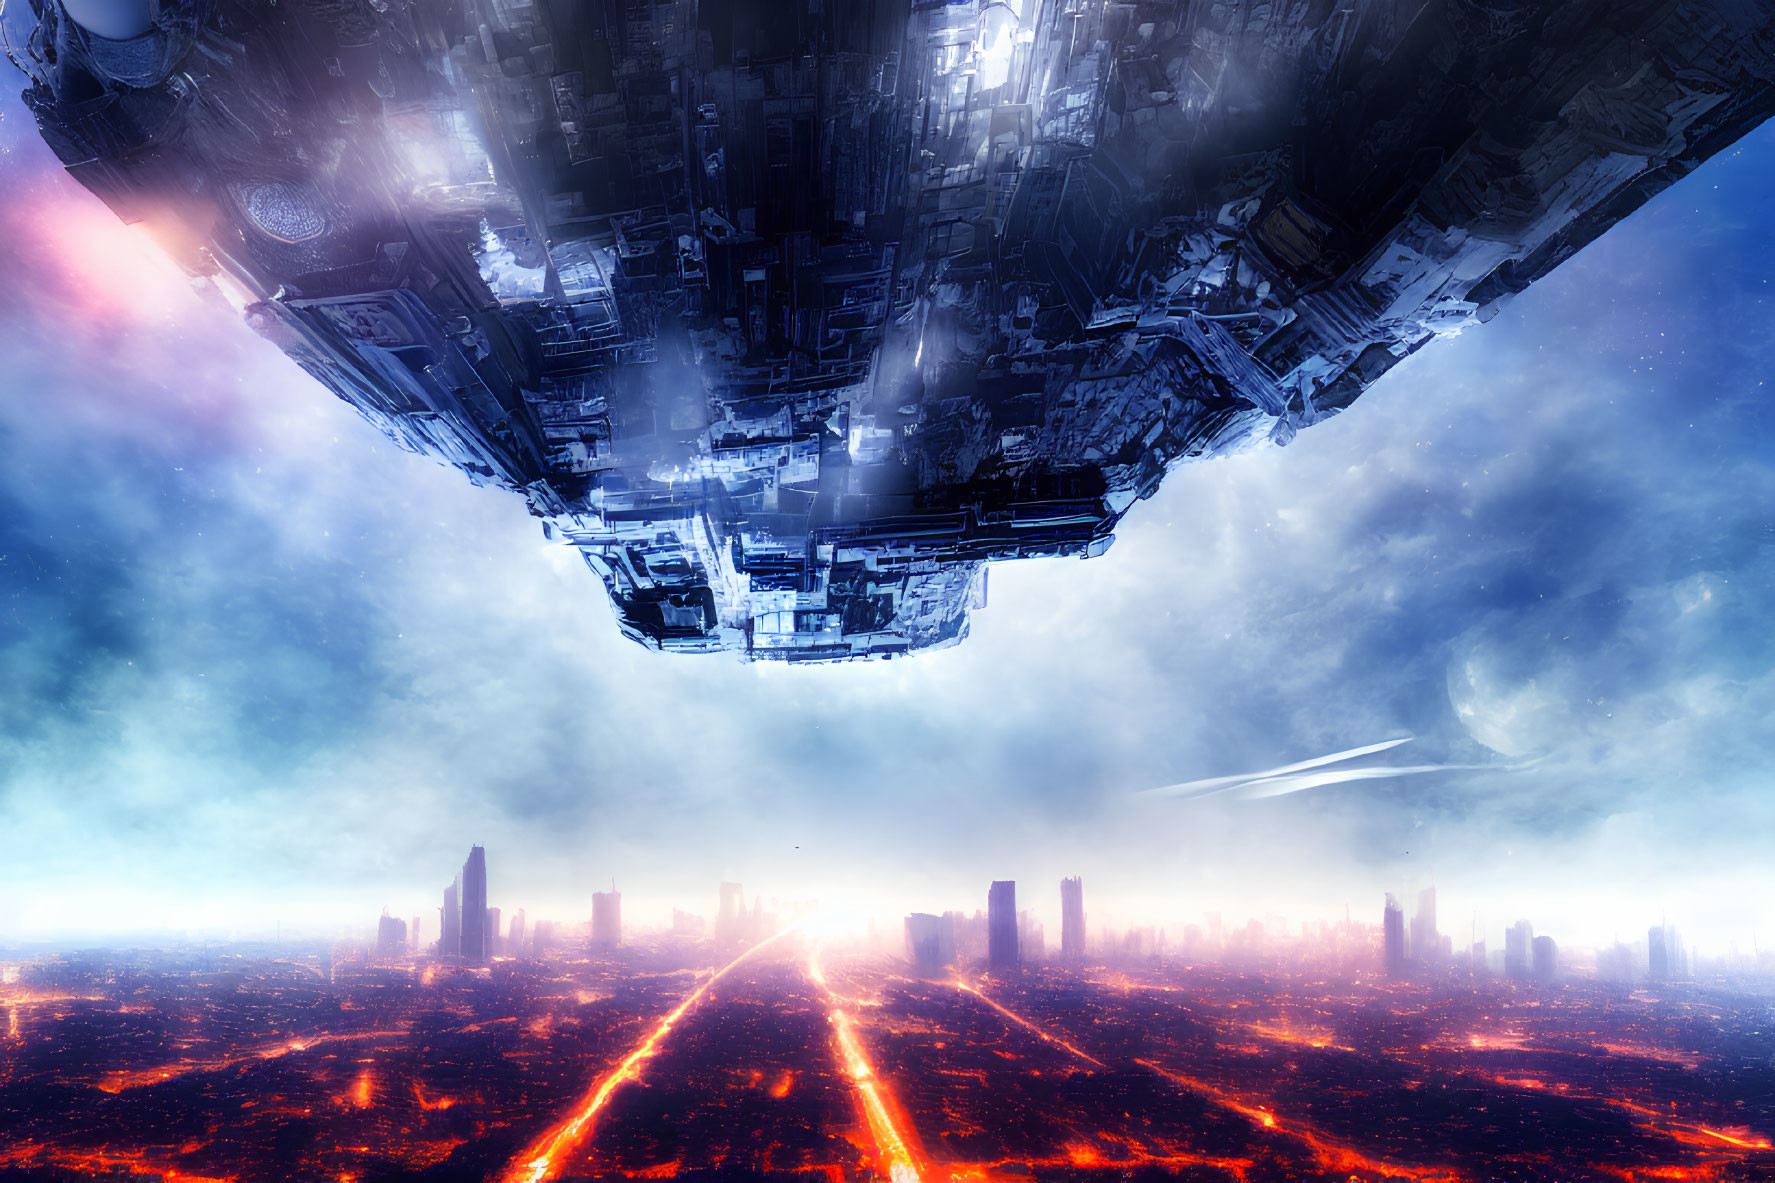 Gigantic spaceship over dystopian city with fiery streaks and blue sky